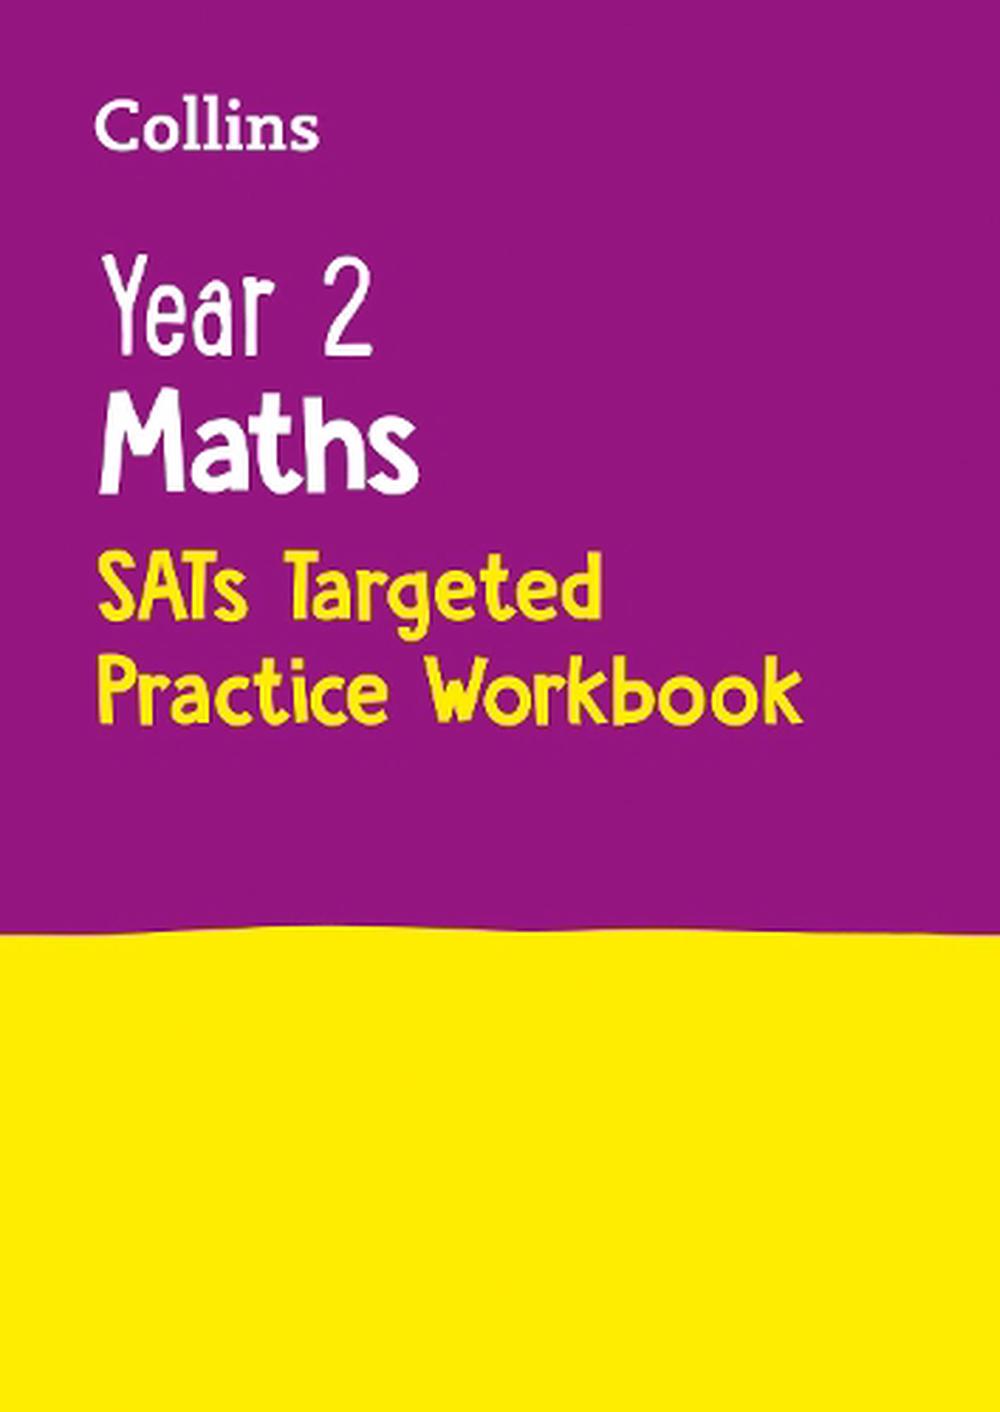 year-2-maths-sats-targeted-practice-workbook-by-collins-ks1-paperback-book-free-9780008179007-ebay